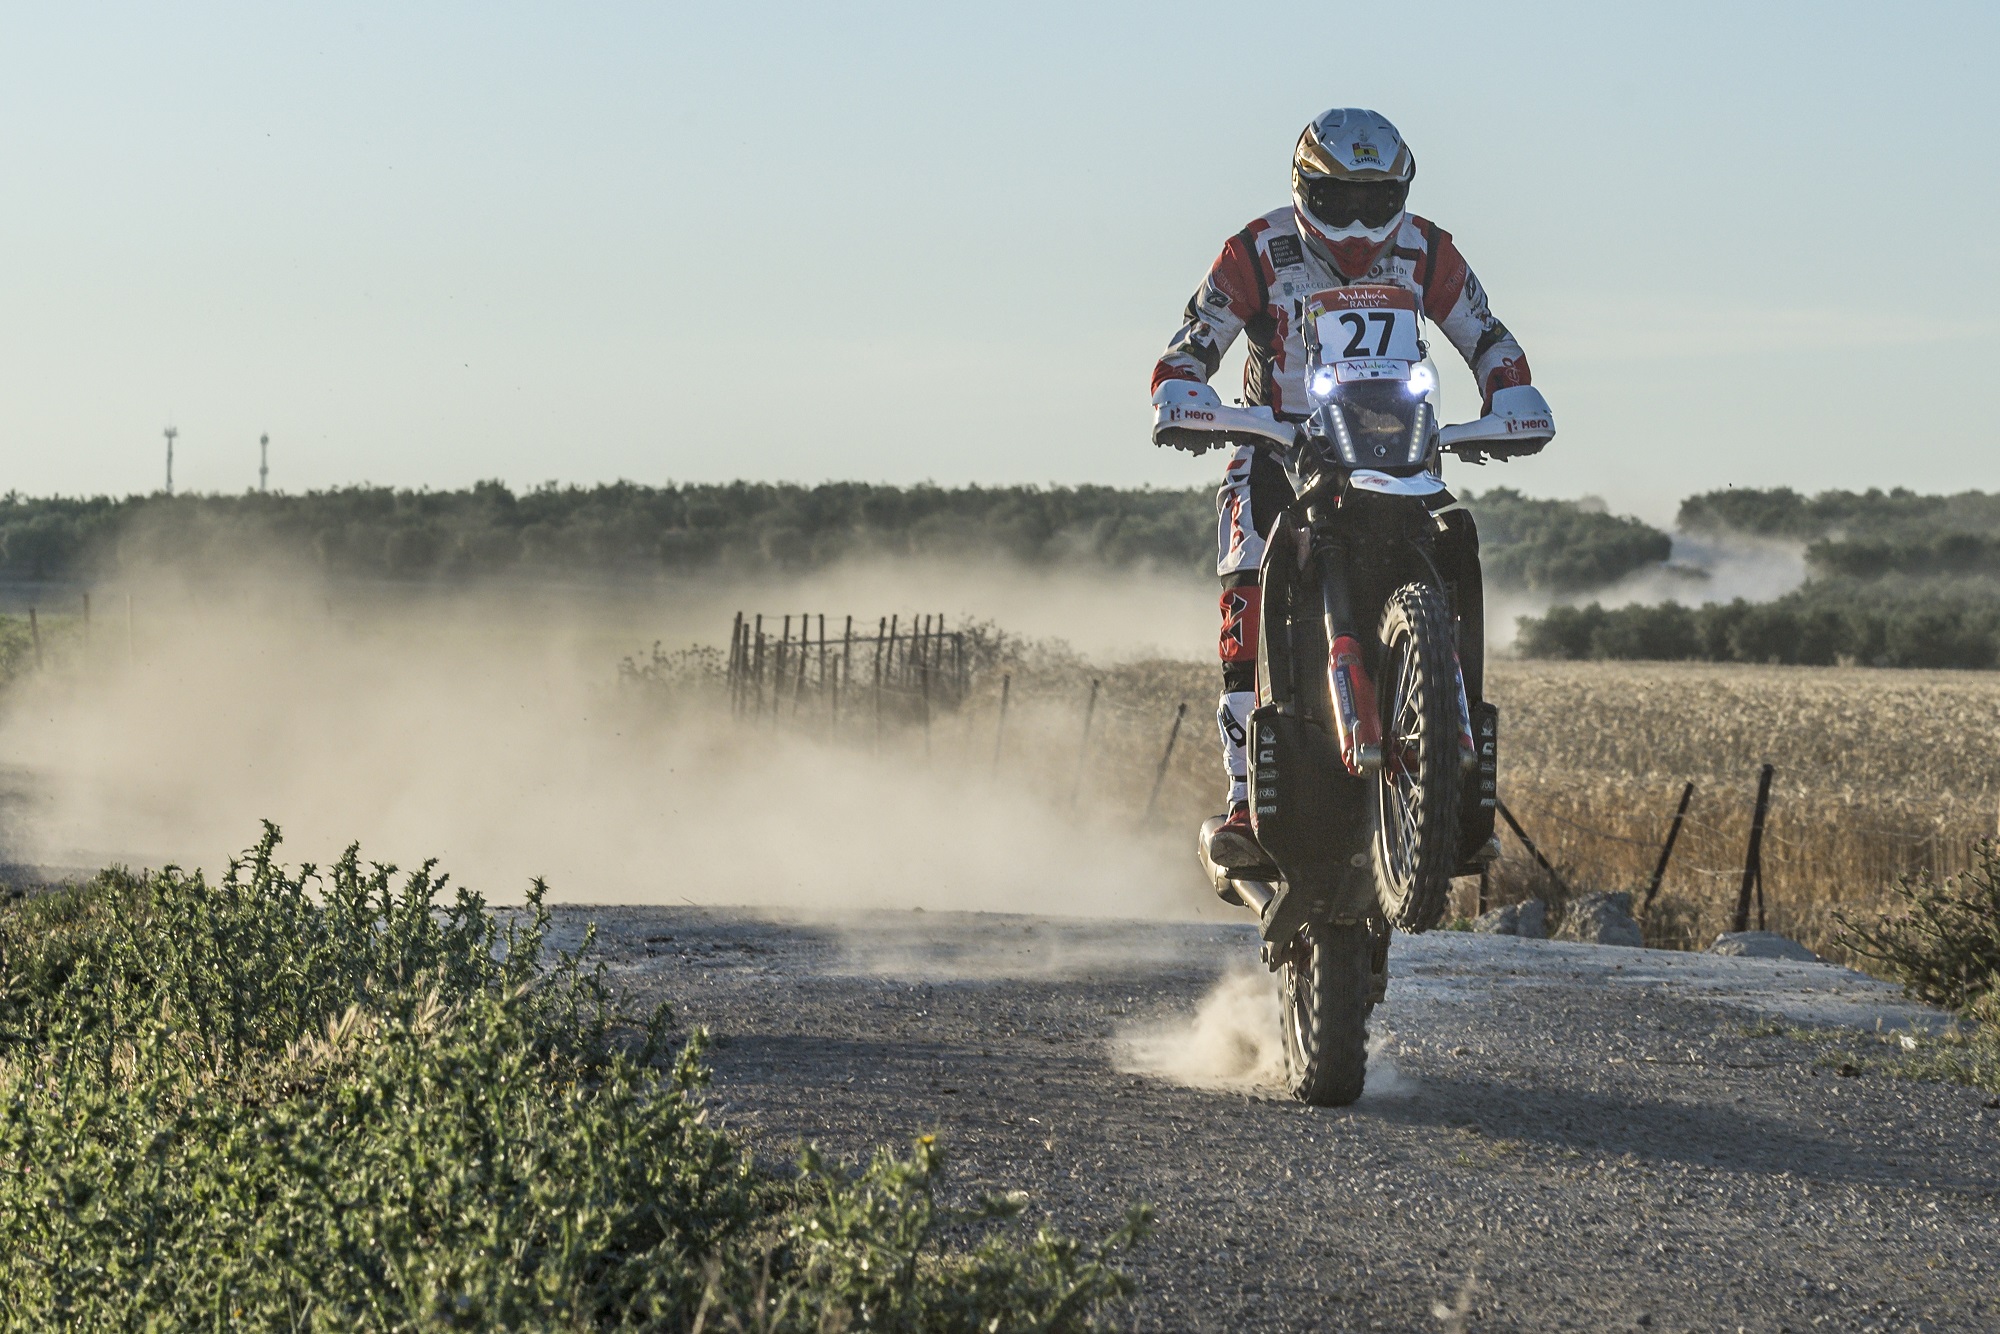 Hero Motosports team rally continues its impressive run  at the Andalucia rally